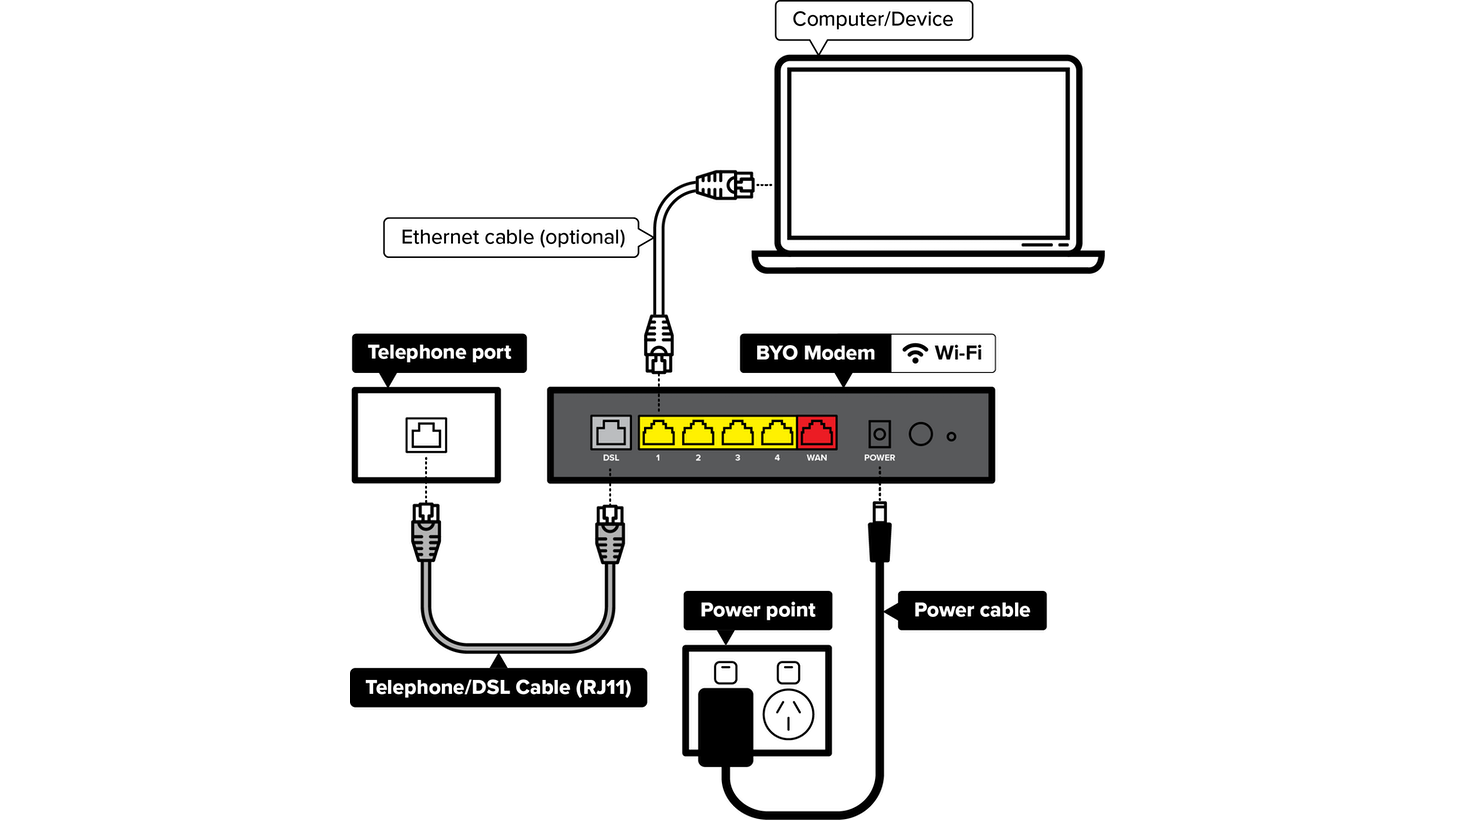 A diagram for FTTN/B fibre to the node / basement nbn showing how to set up a generic, BYO modem. Compatible modems are connected directly to an existing telephone port / socket using a “DSL” lead, then connected to devices via ethernet cable or wi-fi.